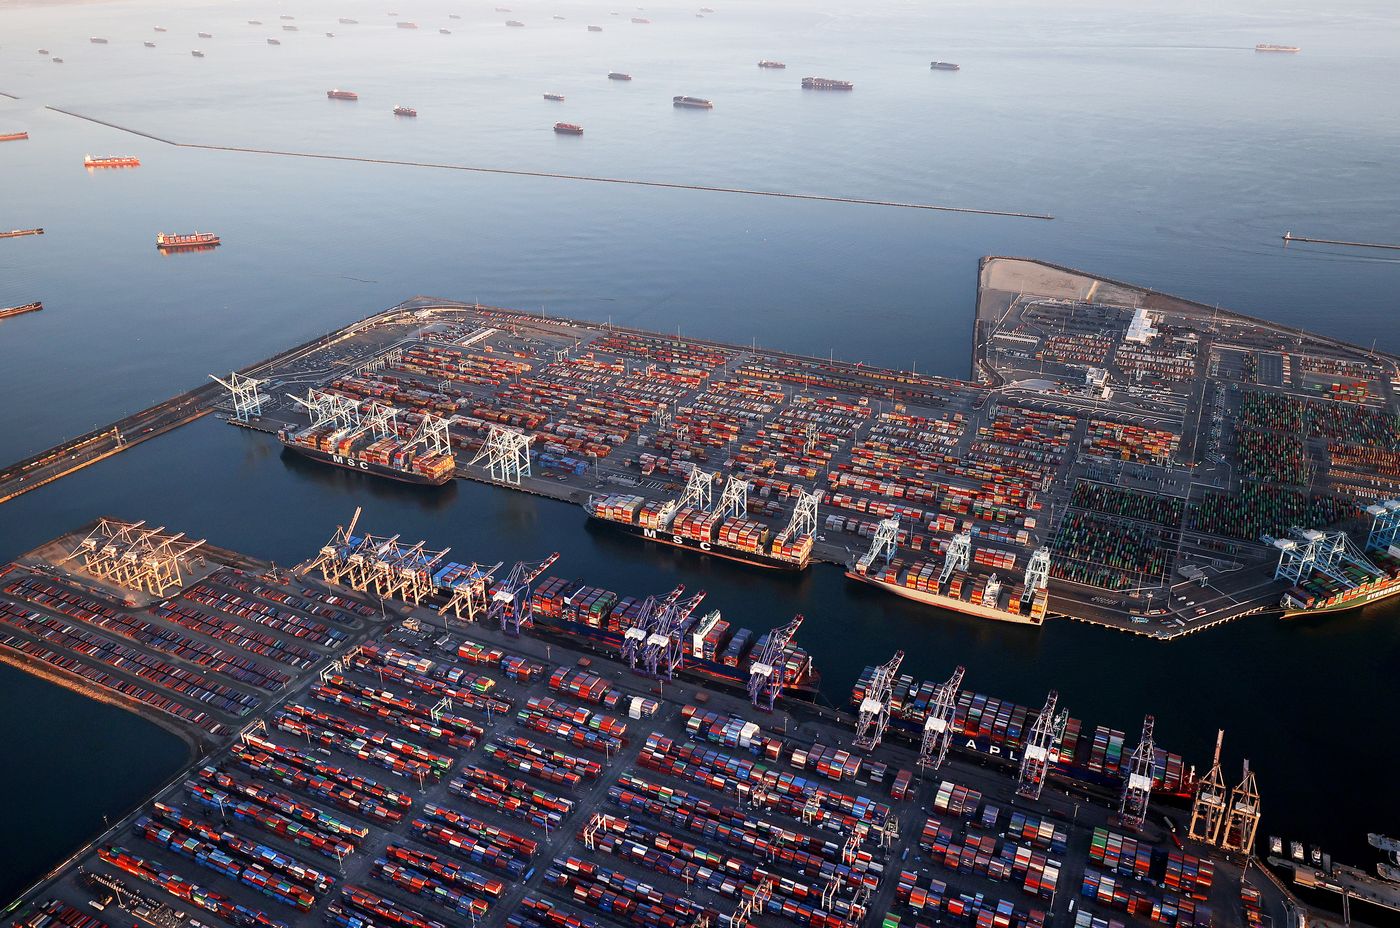 APM Terminals selects Kalmar to deliver 23 semi-automated hybrid shuttle carriers to APM Terminals Tangier, Morocco